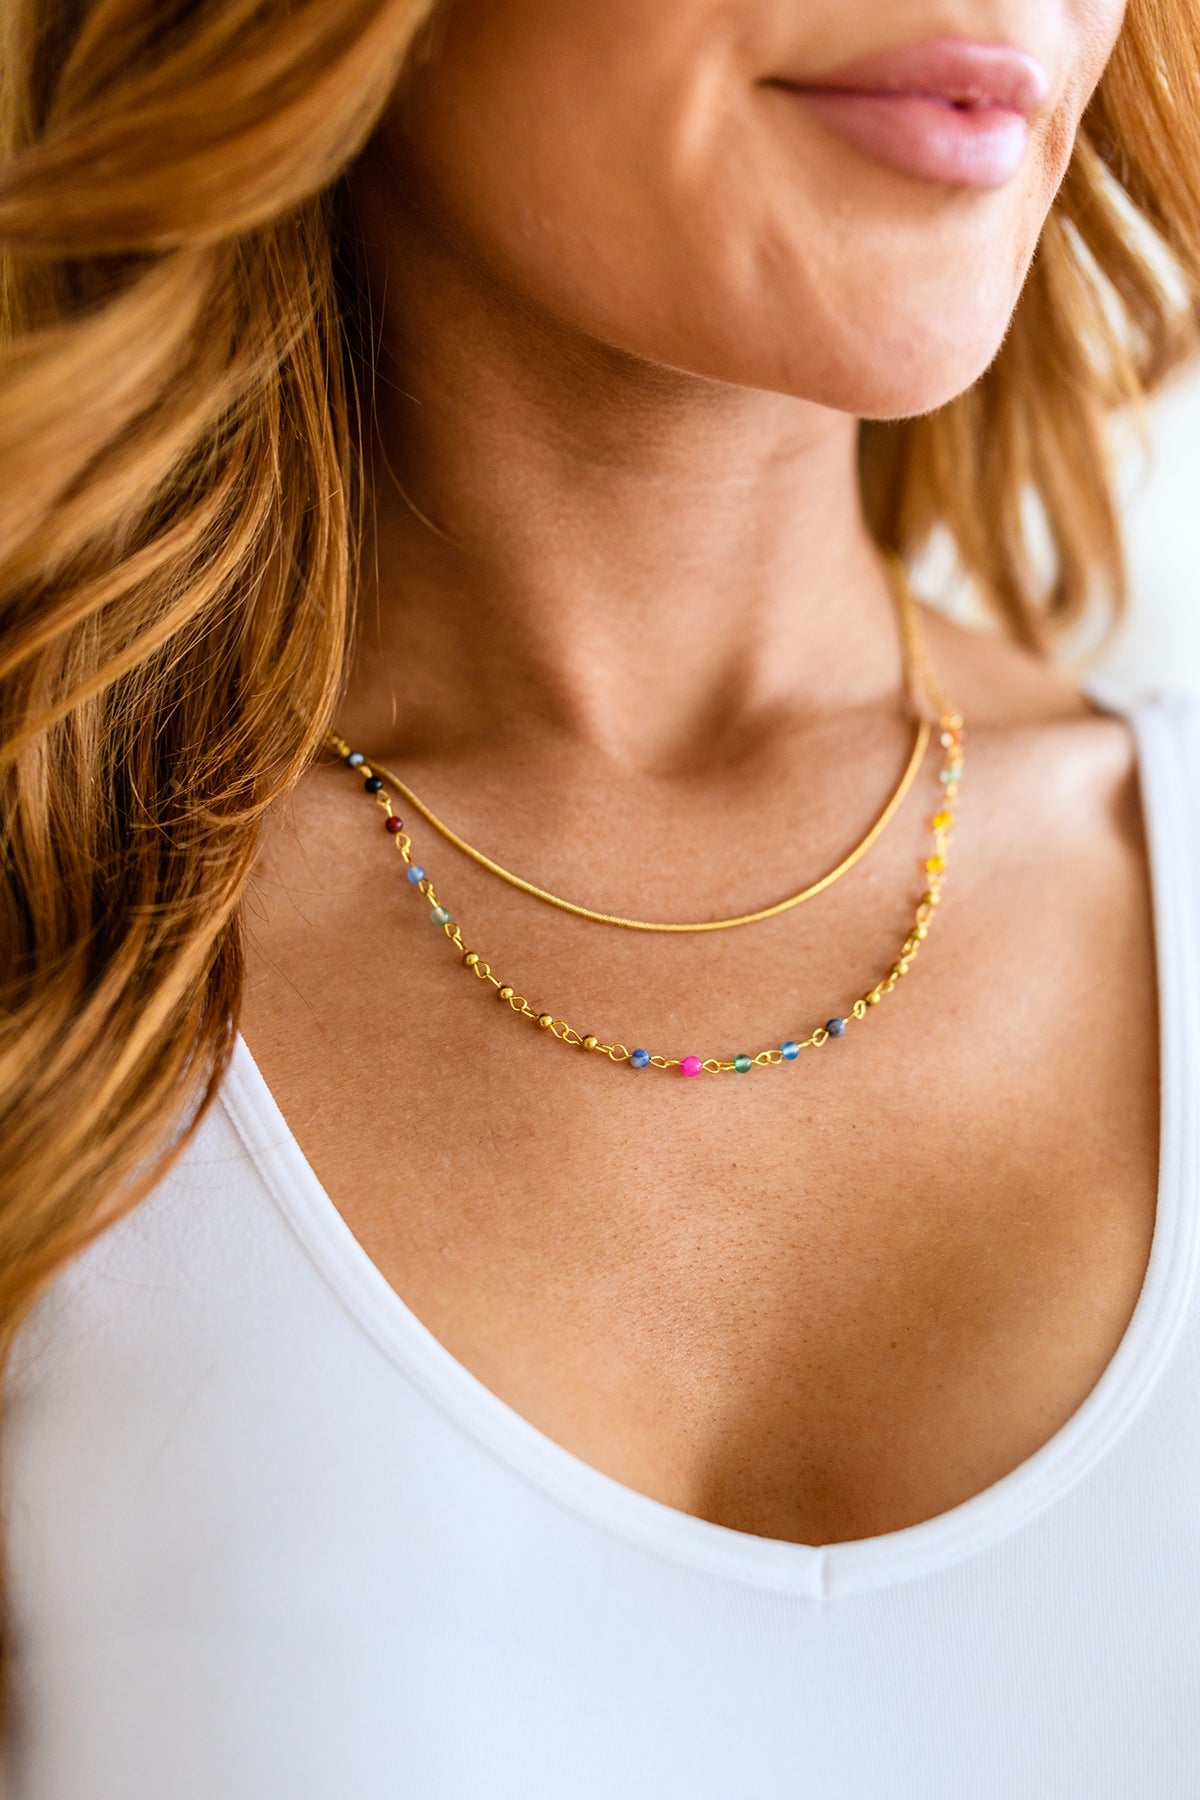 Golden Kaleidoscope Layered Necklace (Ships in 1-2 Weeks)